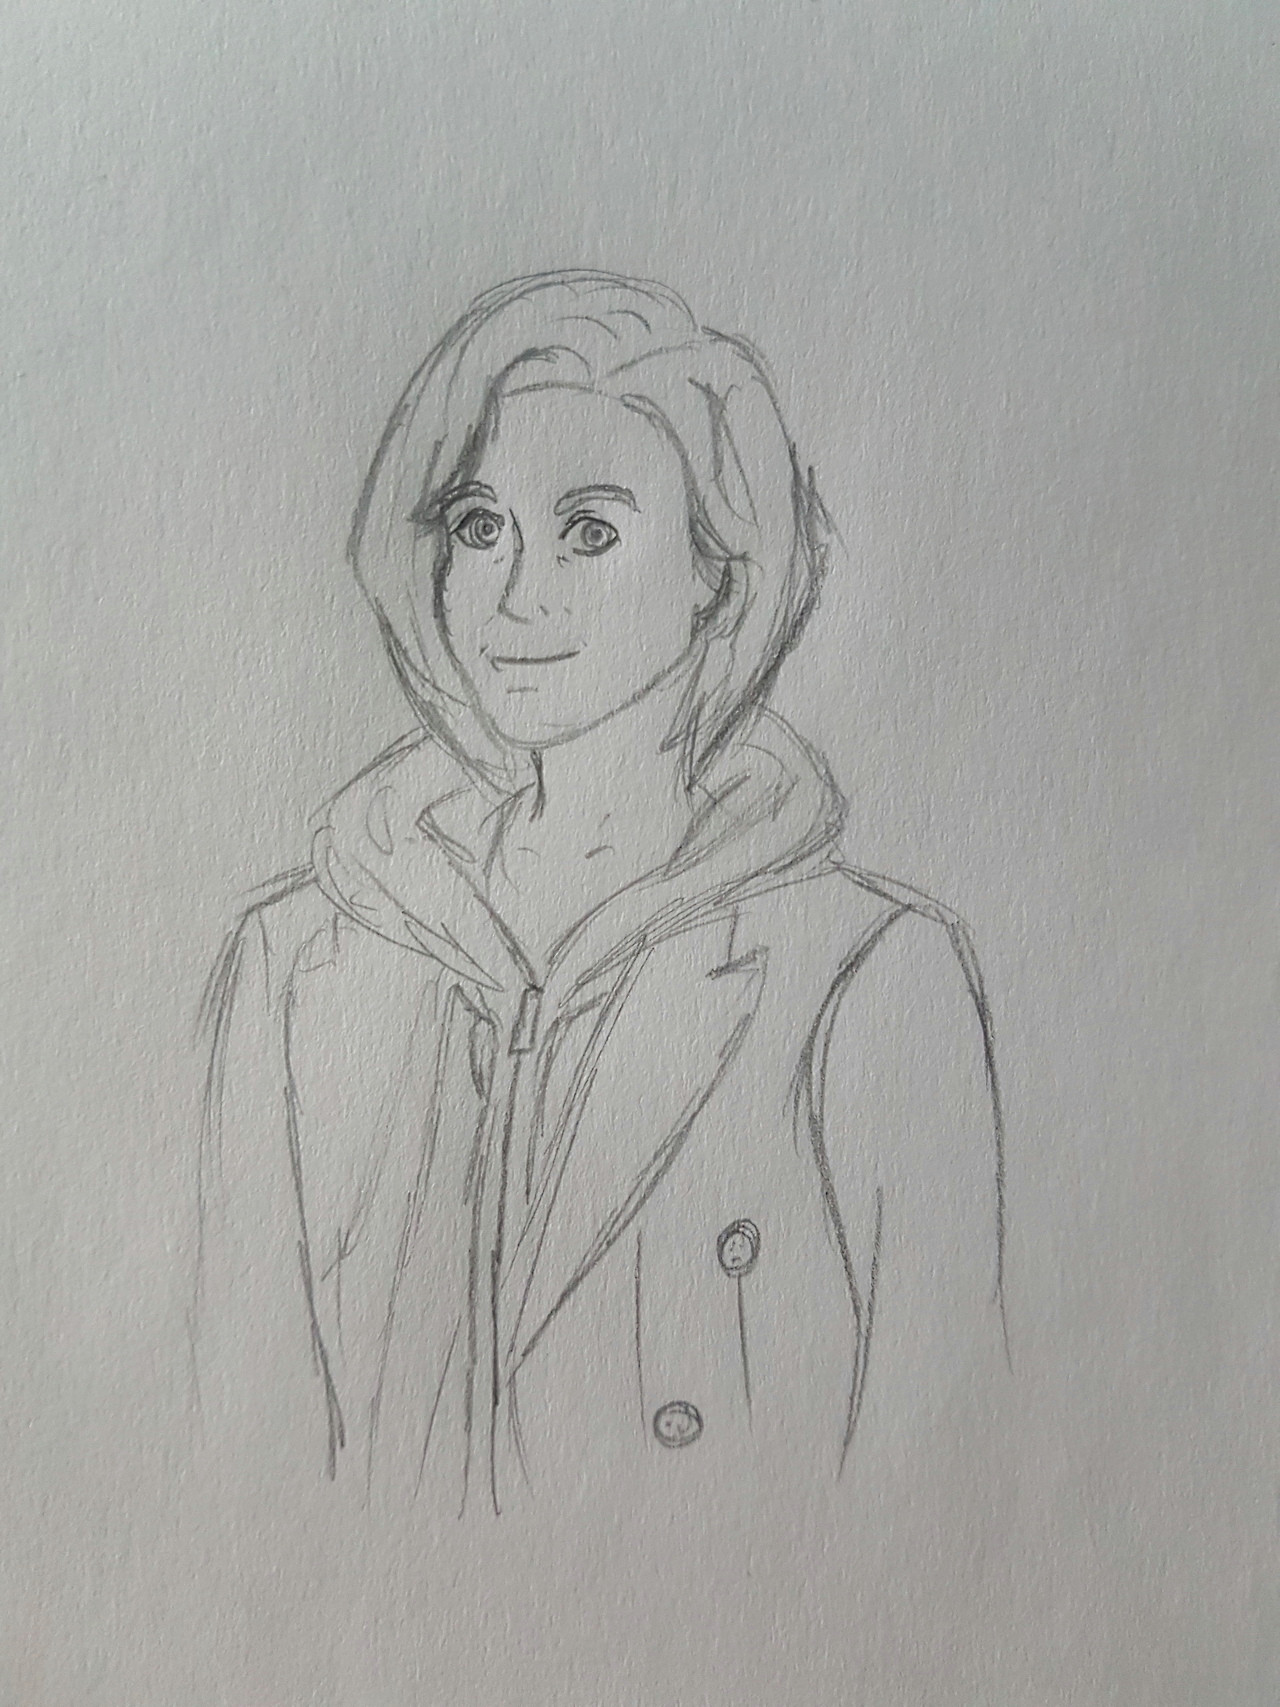 Drawing Of A Girl Doctor 13th Doctor Fanart the Thirteenth Doctor Pinterest Fanart and